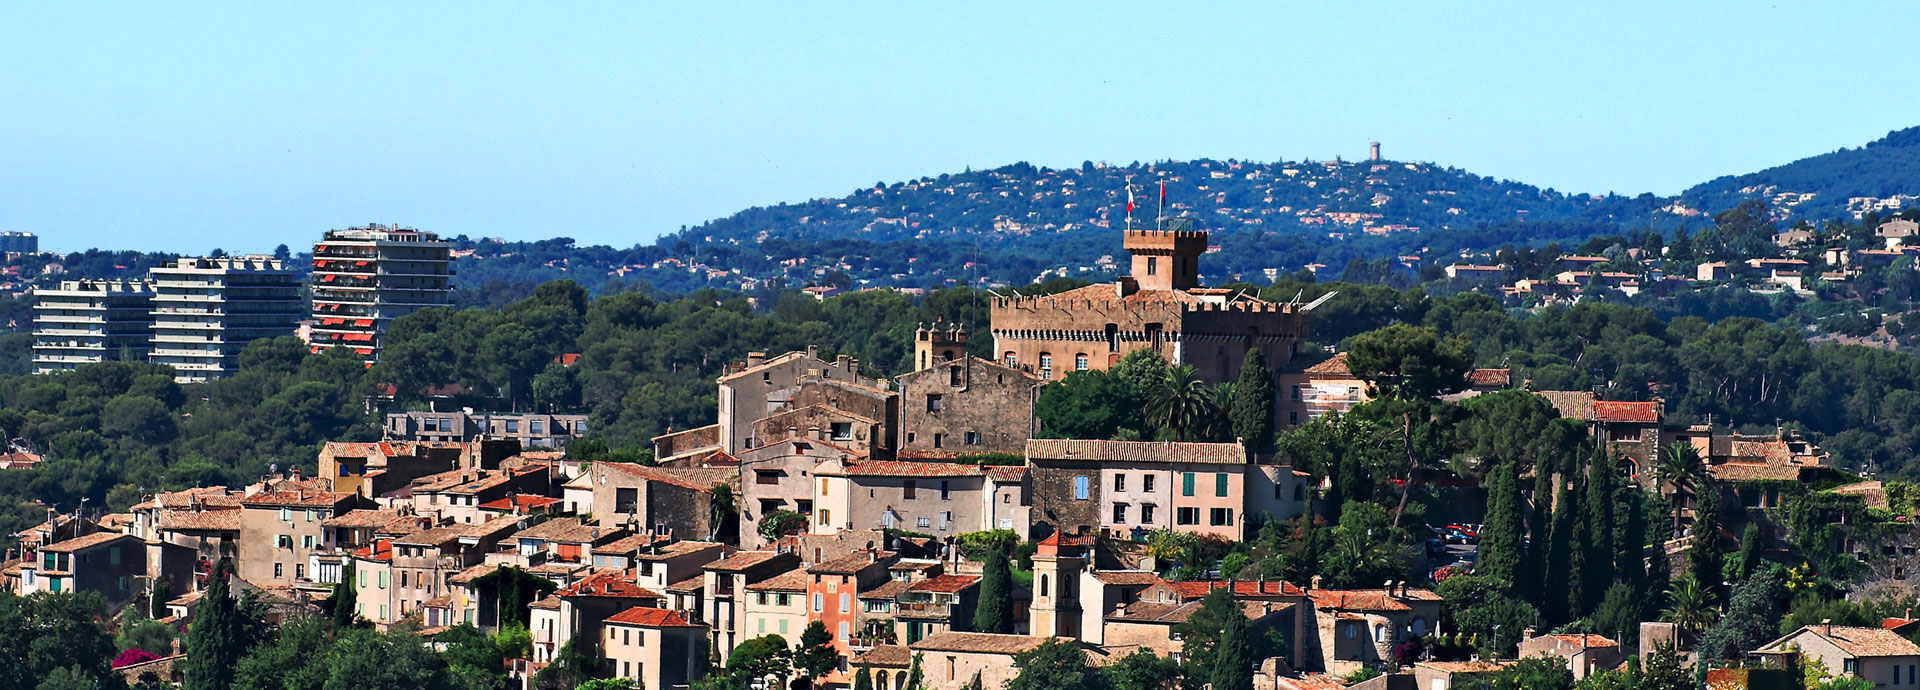 Cagnes-sur-Mer on the French Riviera : Holiday rental in Alpes-Maritimes